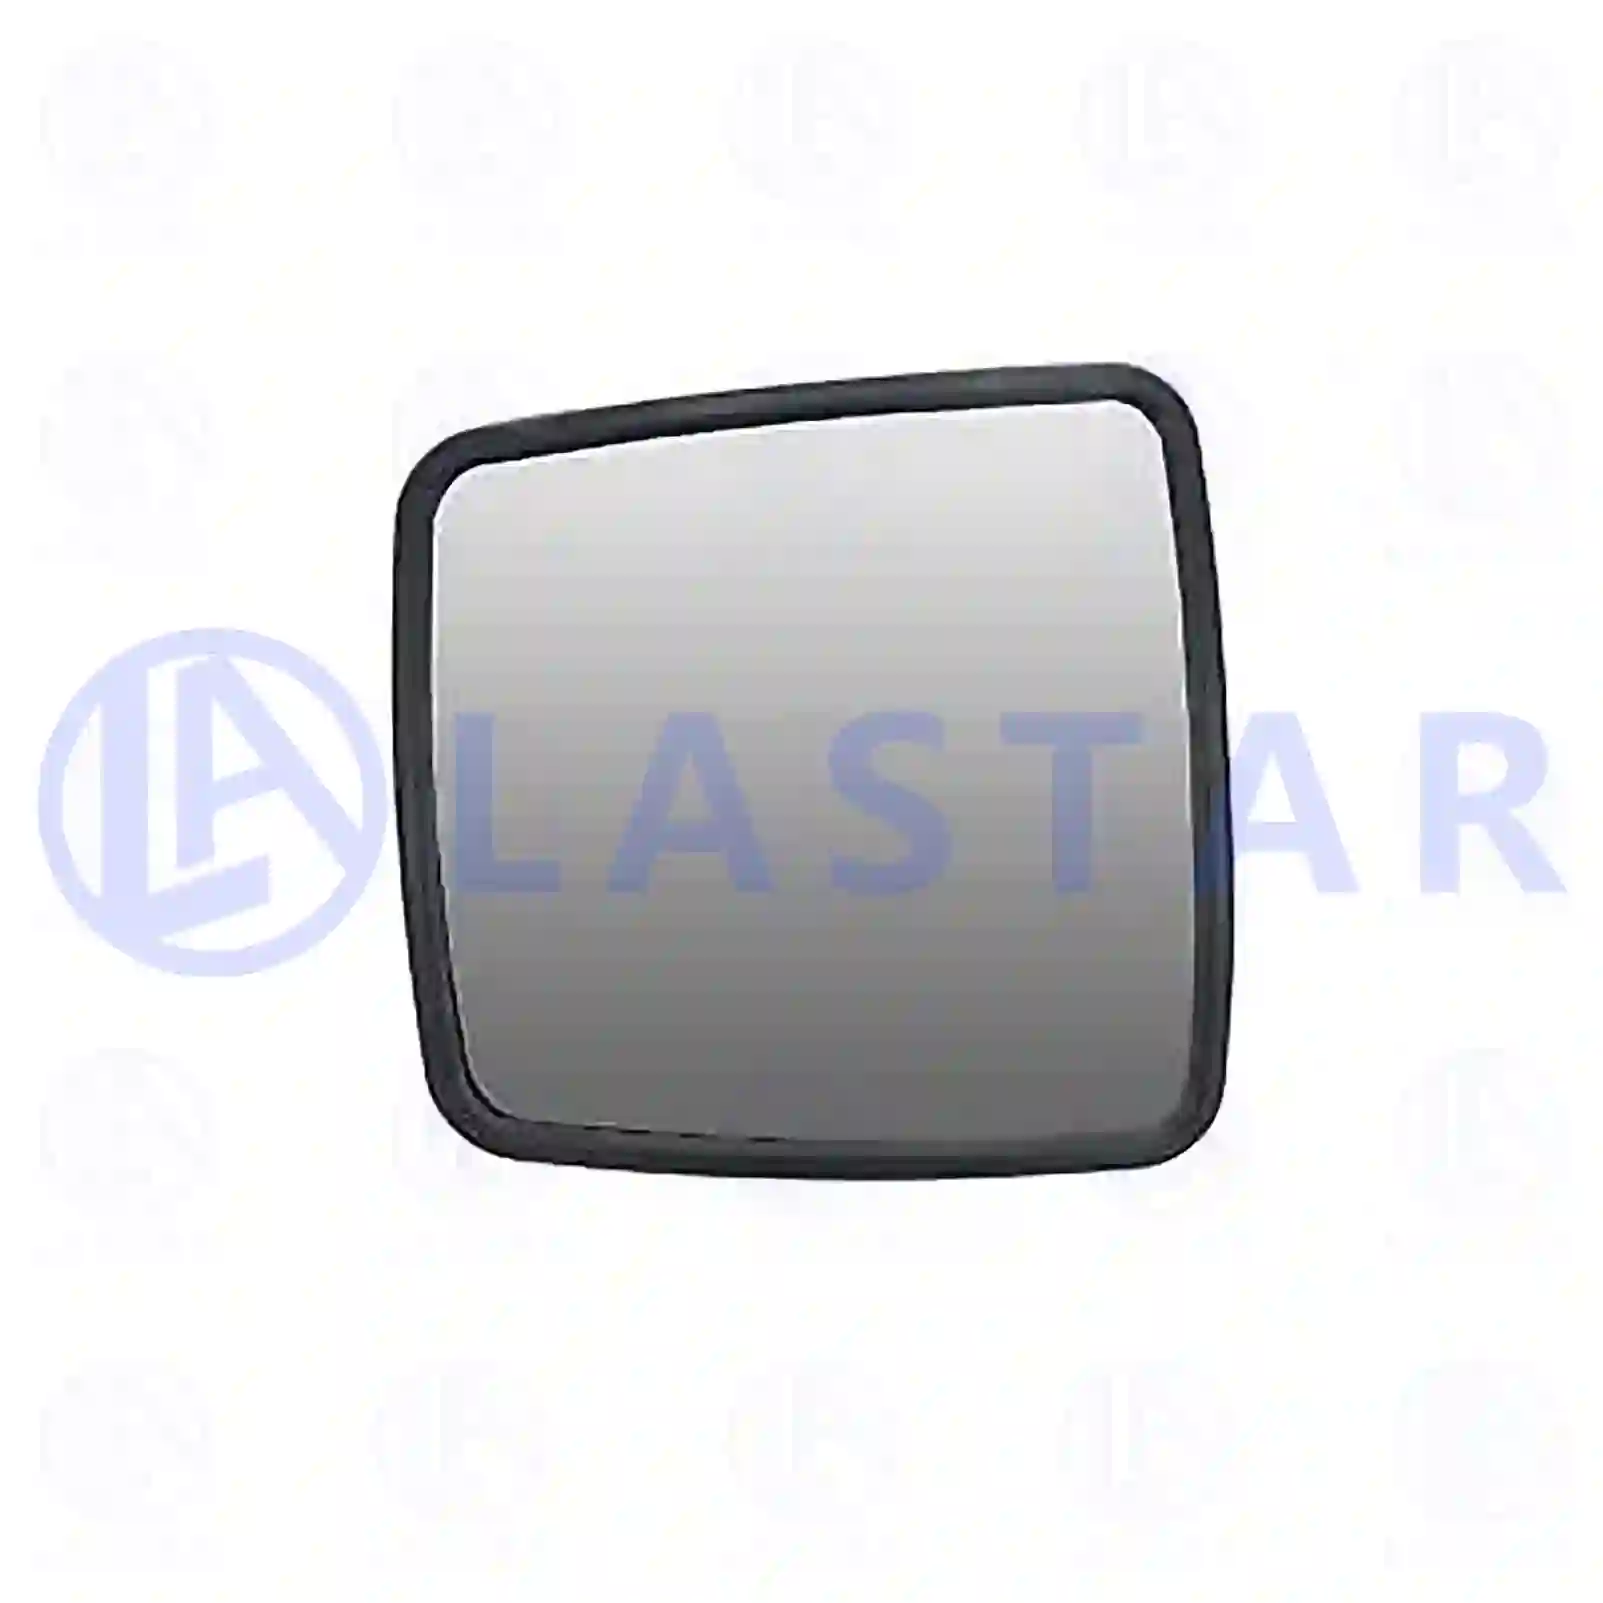 Wide view mirror, 77721247, 82417044S, 82471689S ||  77721247 Lastar Spare Part | Truck Spare Parts, Auotomotive Spare Parts Wide view mirror, 77721247, 82417044S, 82471689S ||  77721247 Lastar Spare Part | Truck Spare Parts, Auotomotive Spare Parts